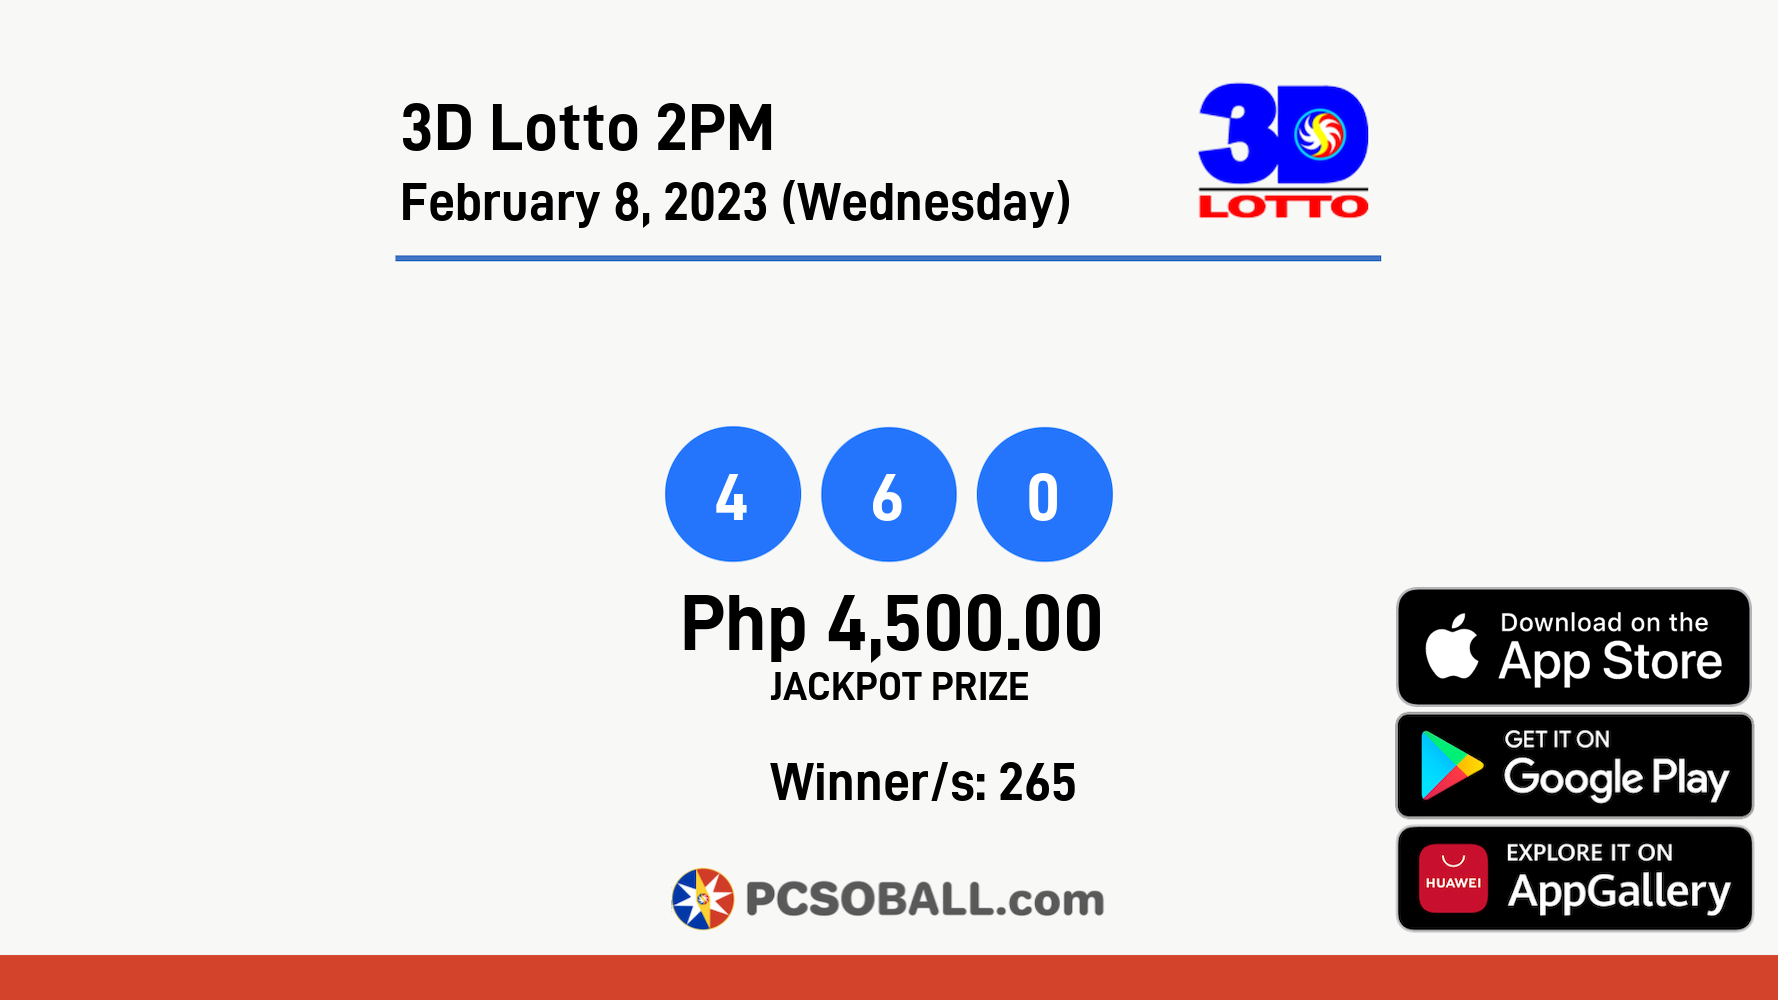 3D Lotto 2PM February 8, 2023 (Wednesday) Result